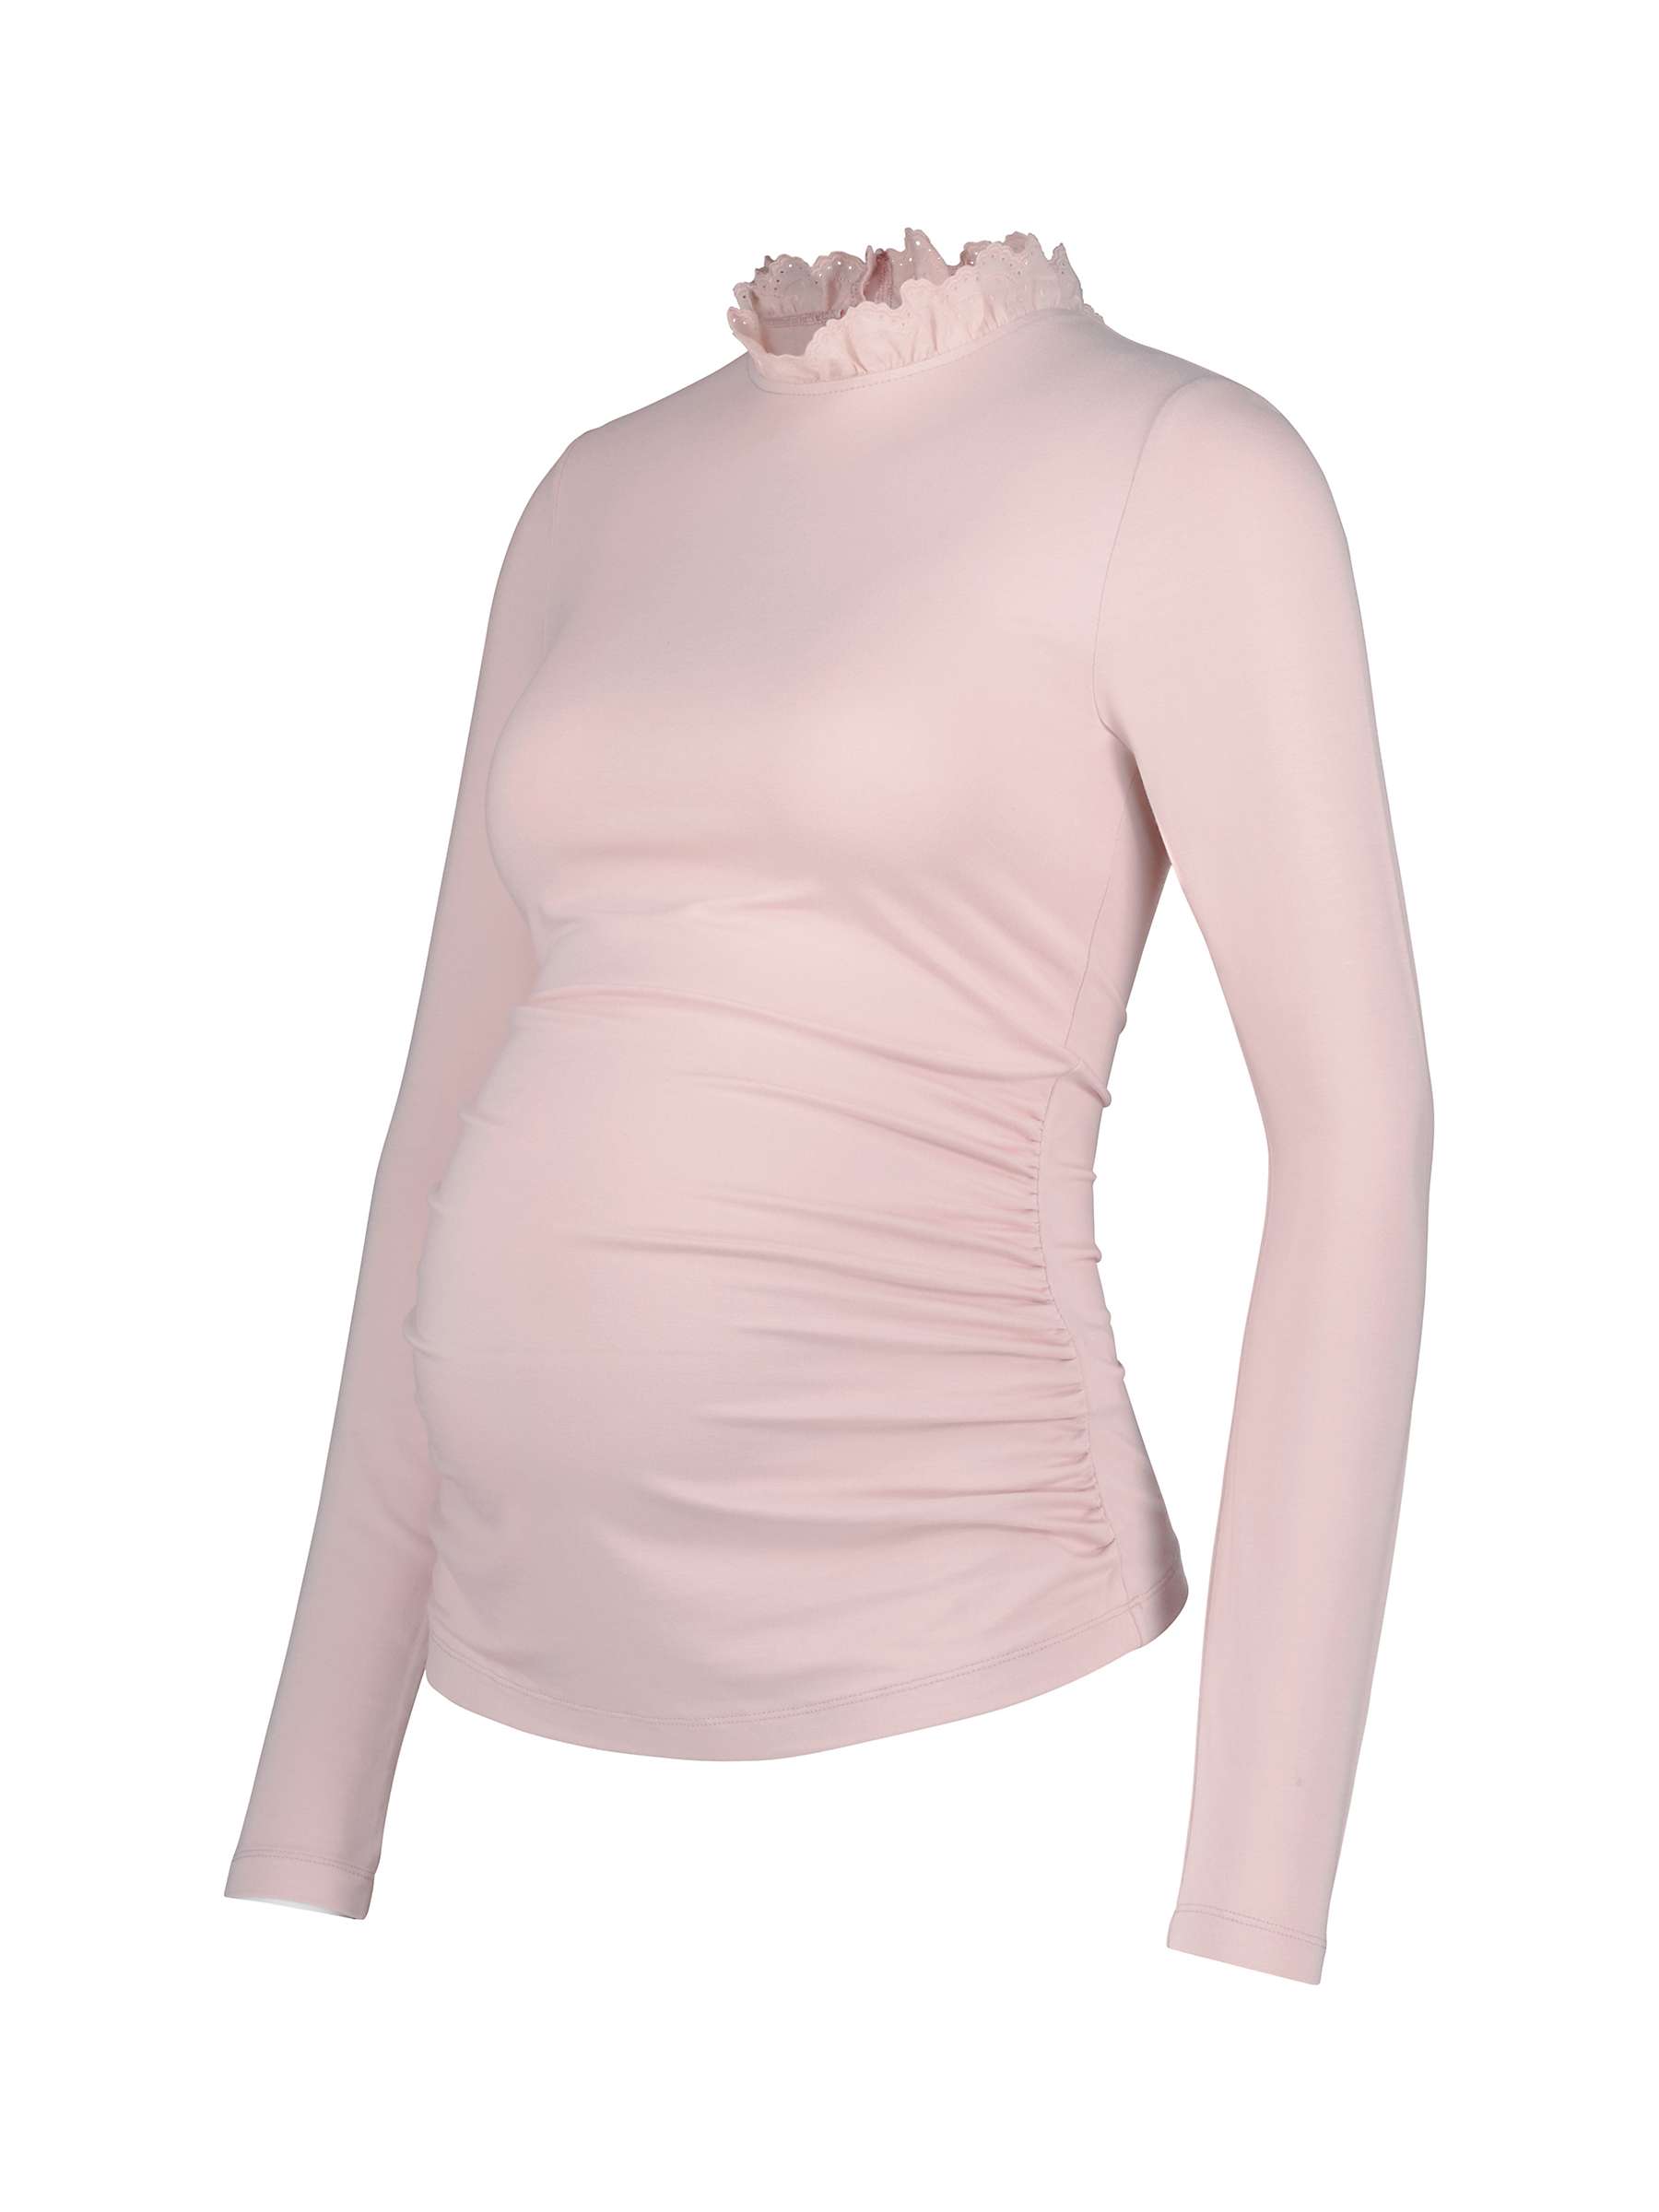 Buy Isabella Oliver Maternity Chanria Ruffle Detail Top Online at johnlewis.com